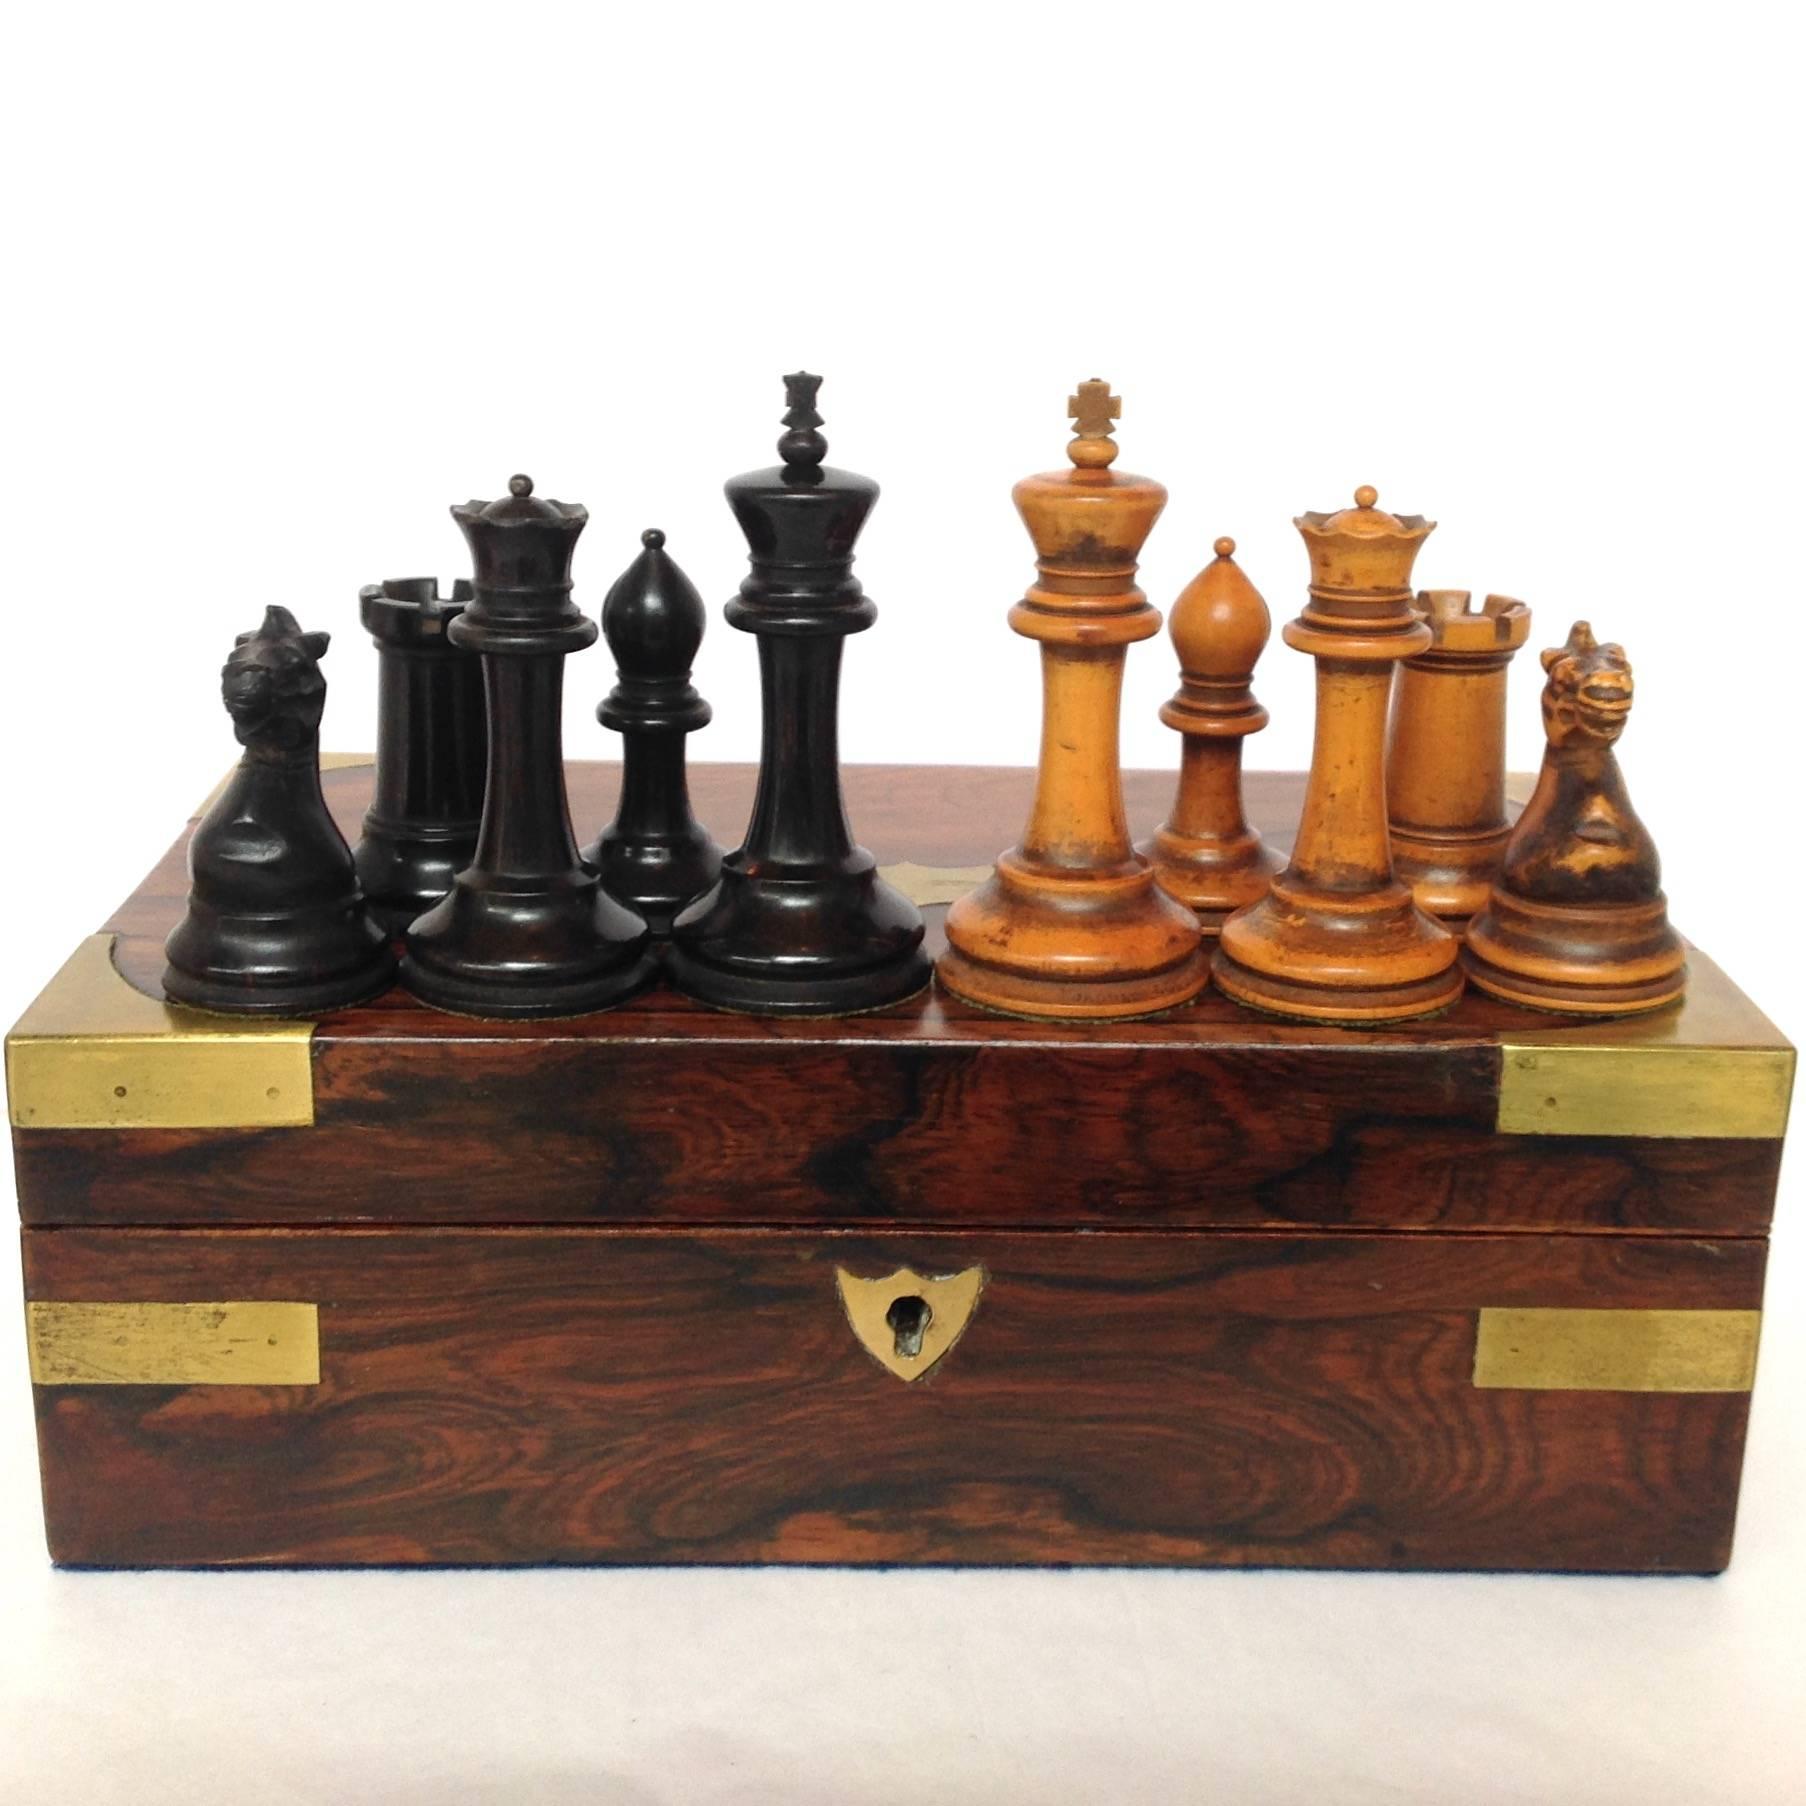 Antique Staunton chess set with boxwood and ebony pieces in rosewood box with brass corners and fittings. The king measures 3.375